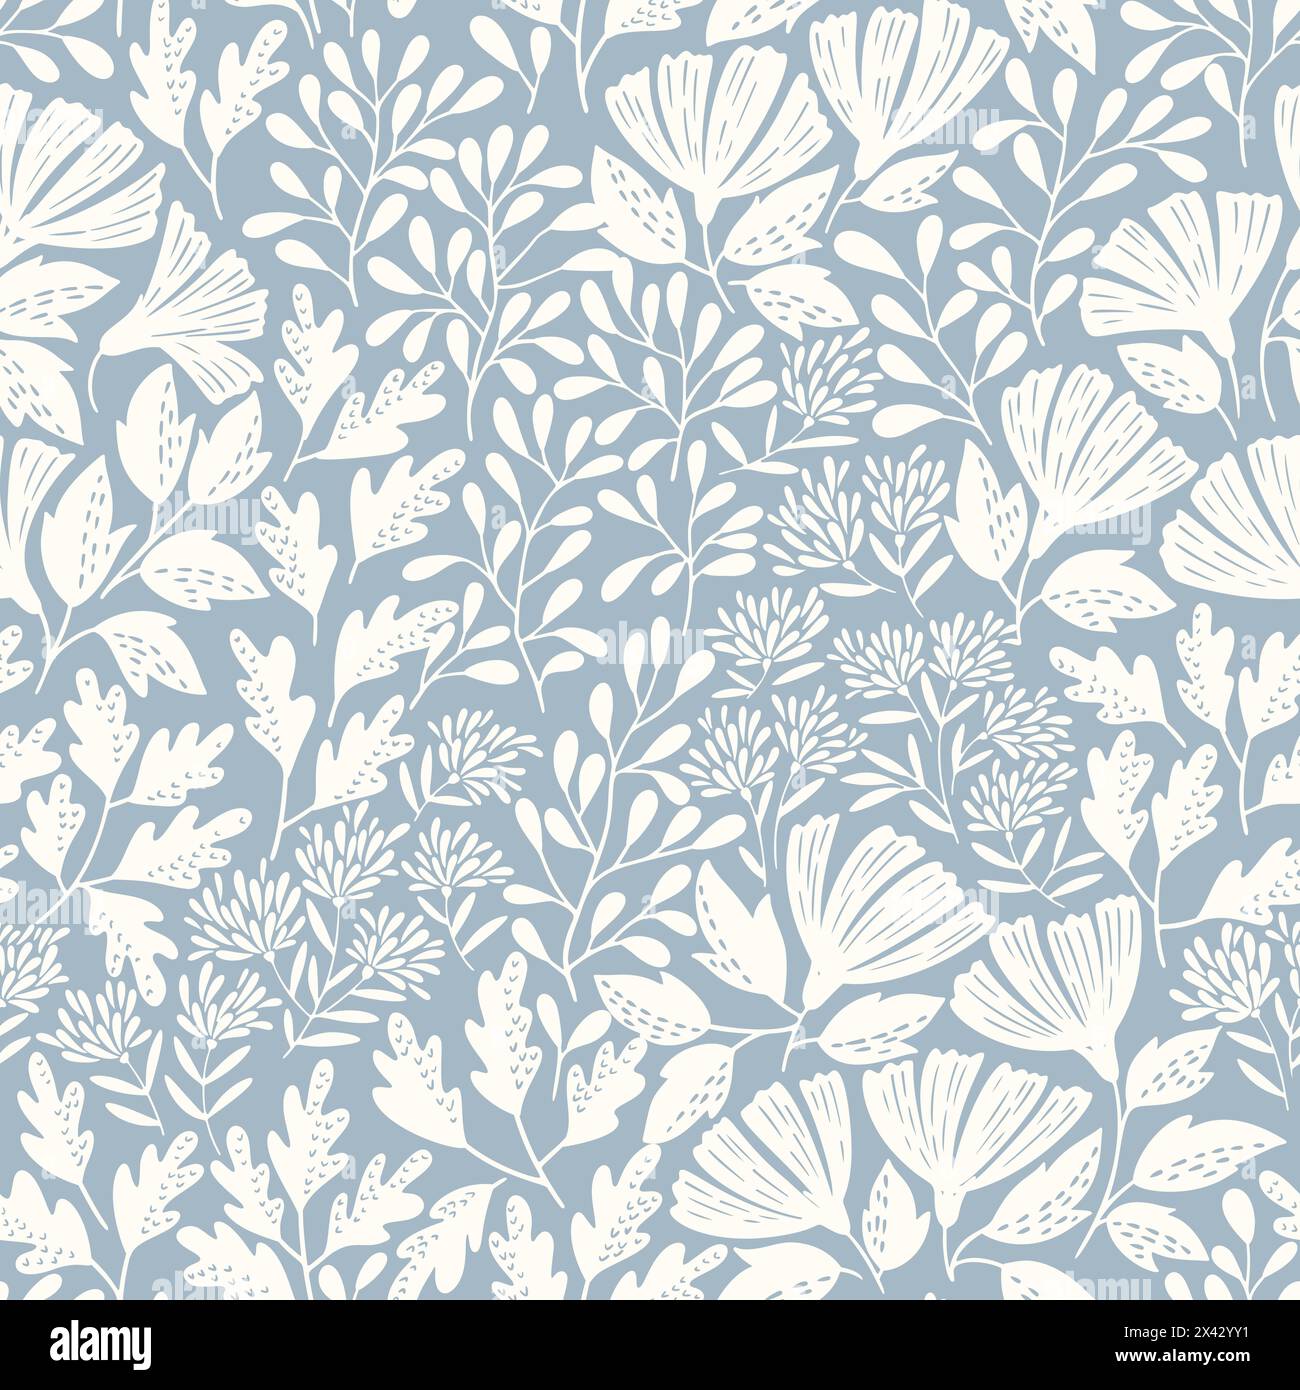 Hand drawn blue Floral pattern. Seamless vector background. Elegant template for fashion prints. Surface with meadow flowers and herbs. Stock Vector